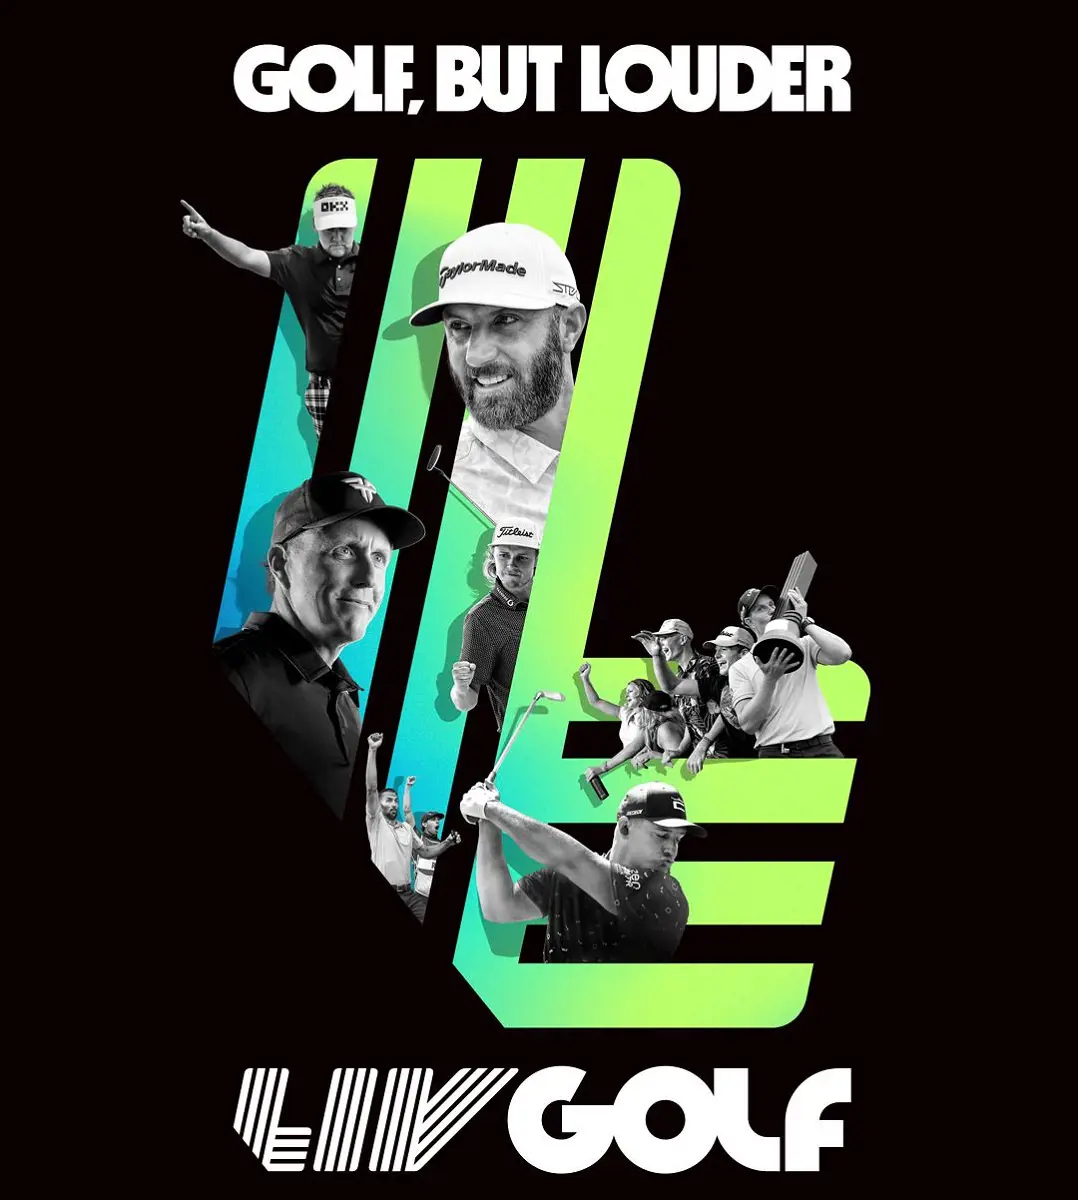 Saudi Golf promotional poster for CW Sports 2023.